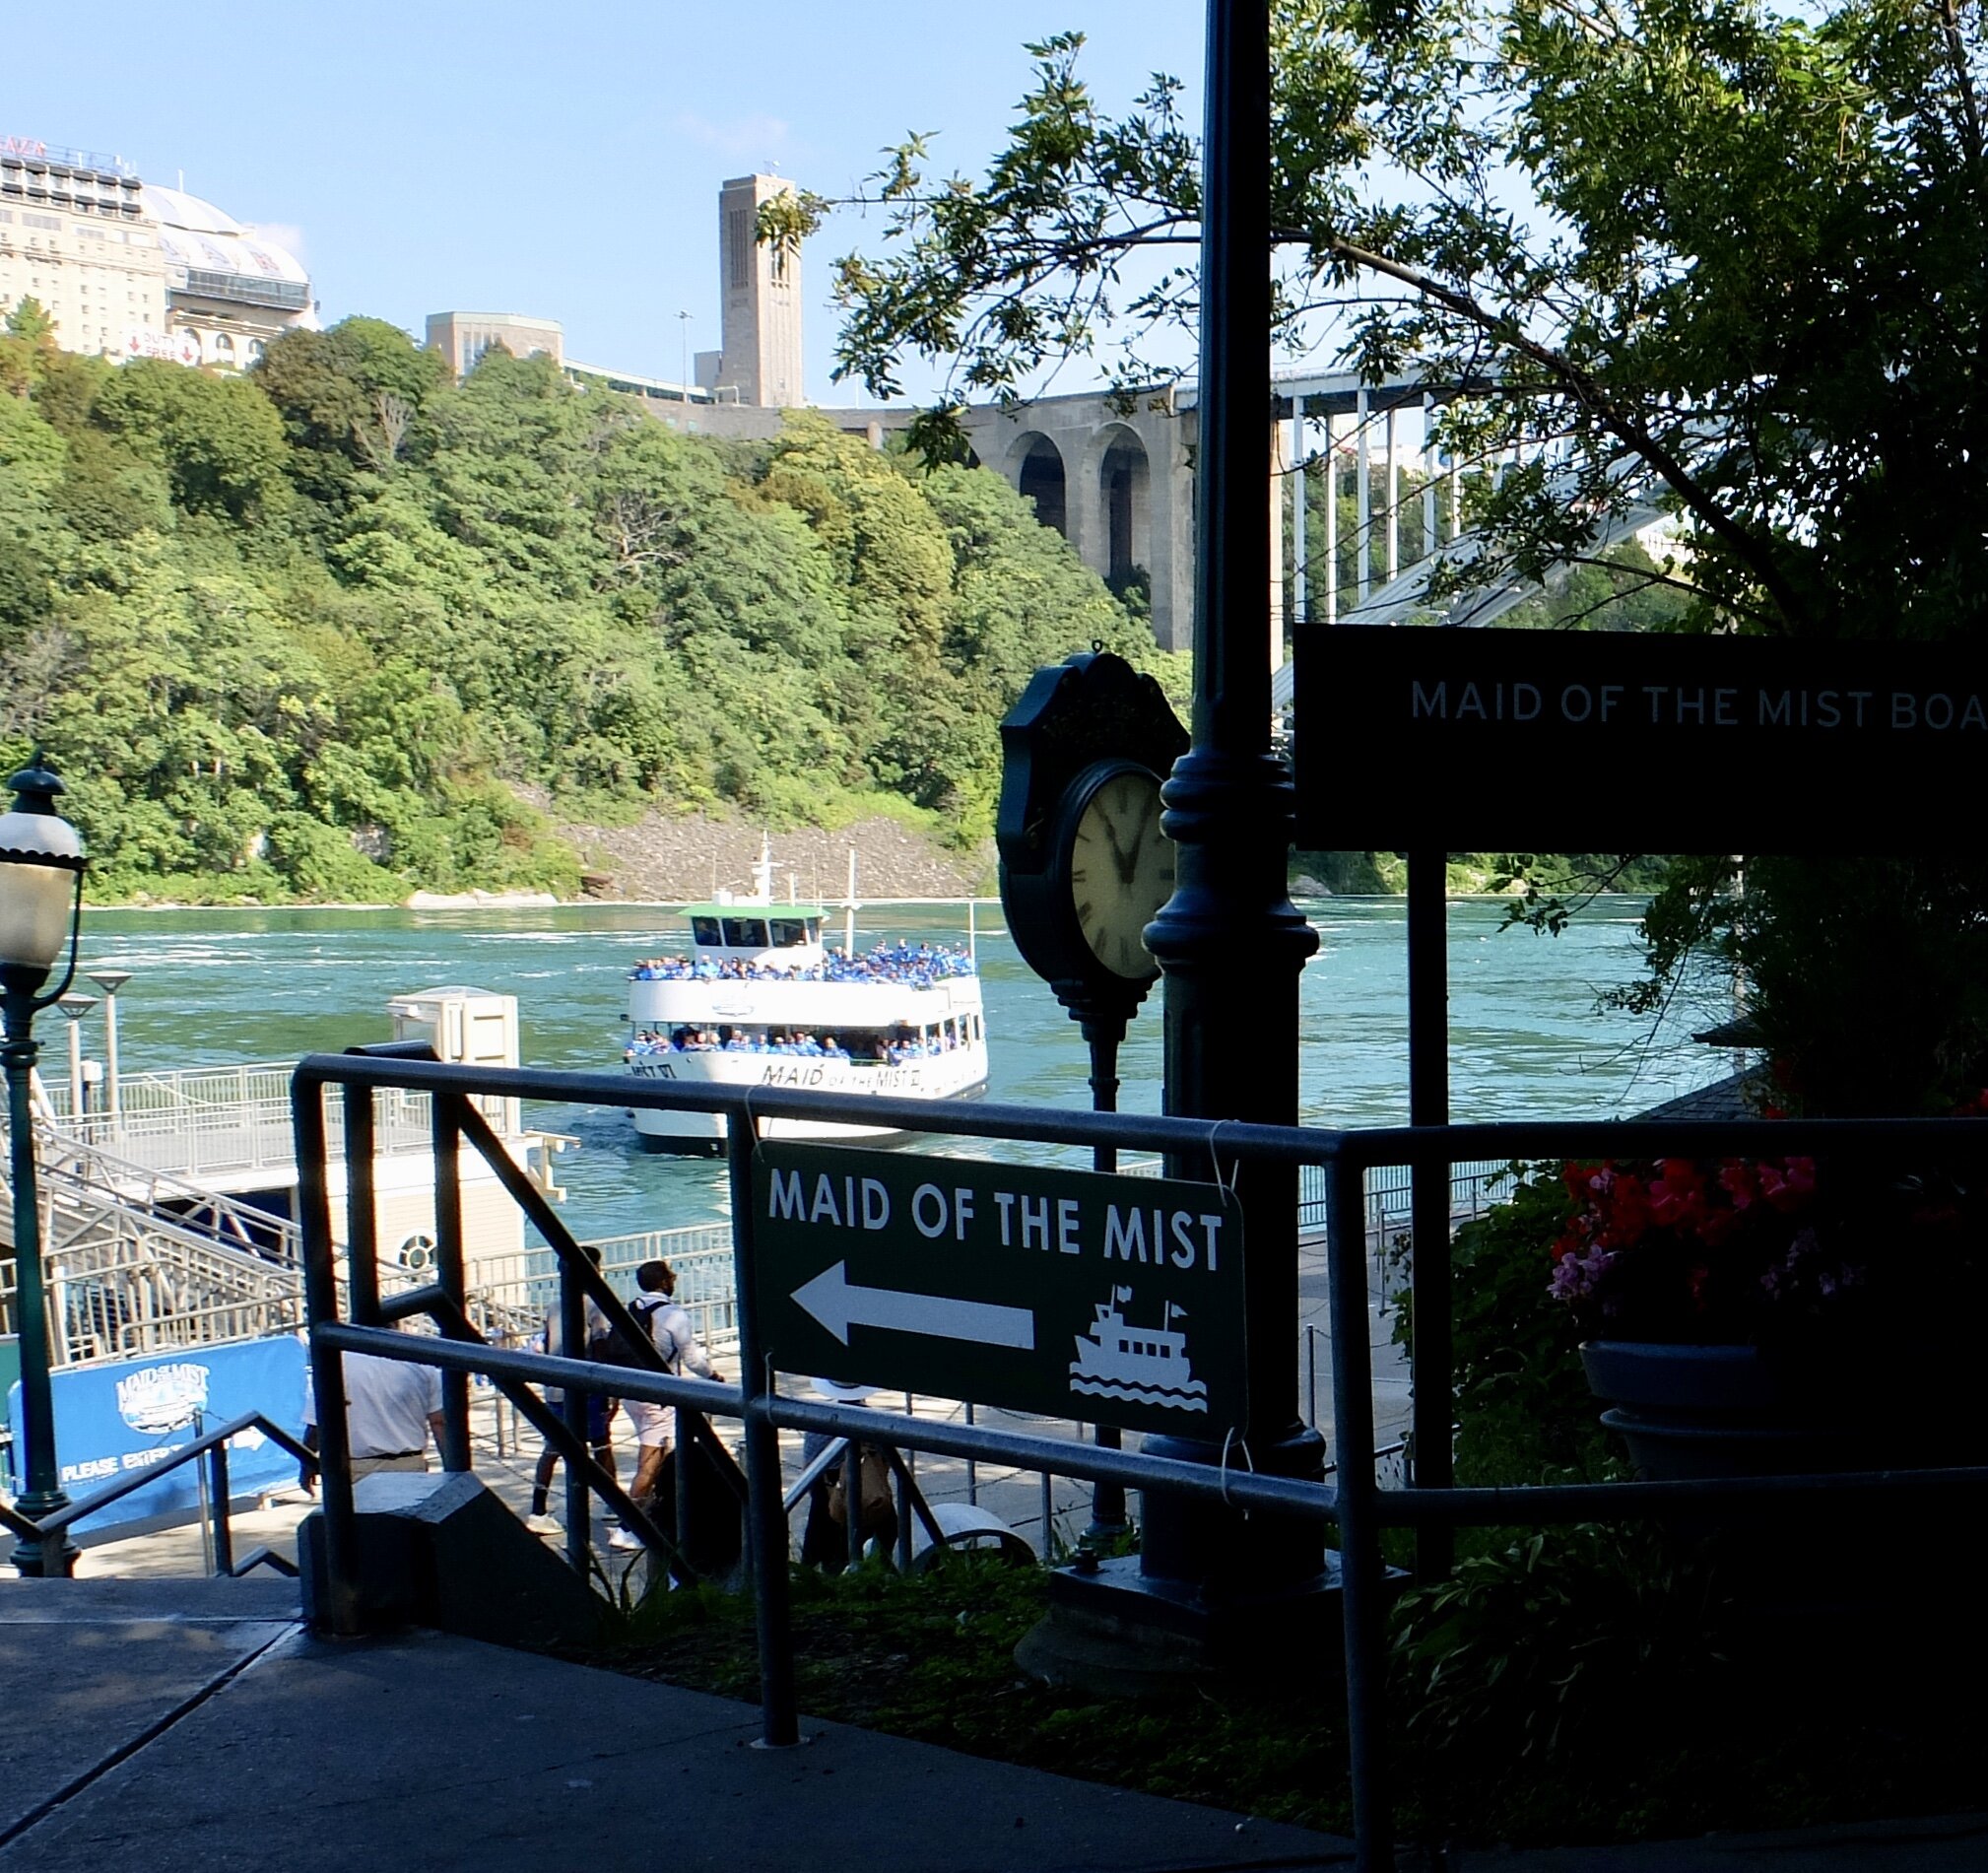 We had planned on the Maid of the Mist ride for the next day.  But, we were there, it was a long drive from Buffalo &amp; the boats on the NY side were not as packed as those on the Canadian side..